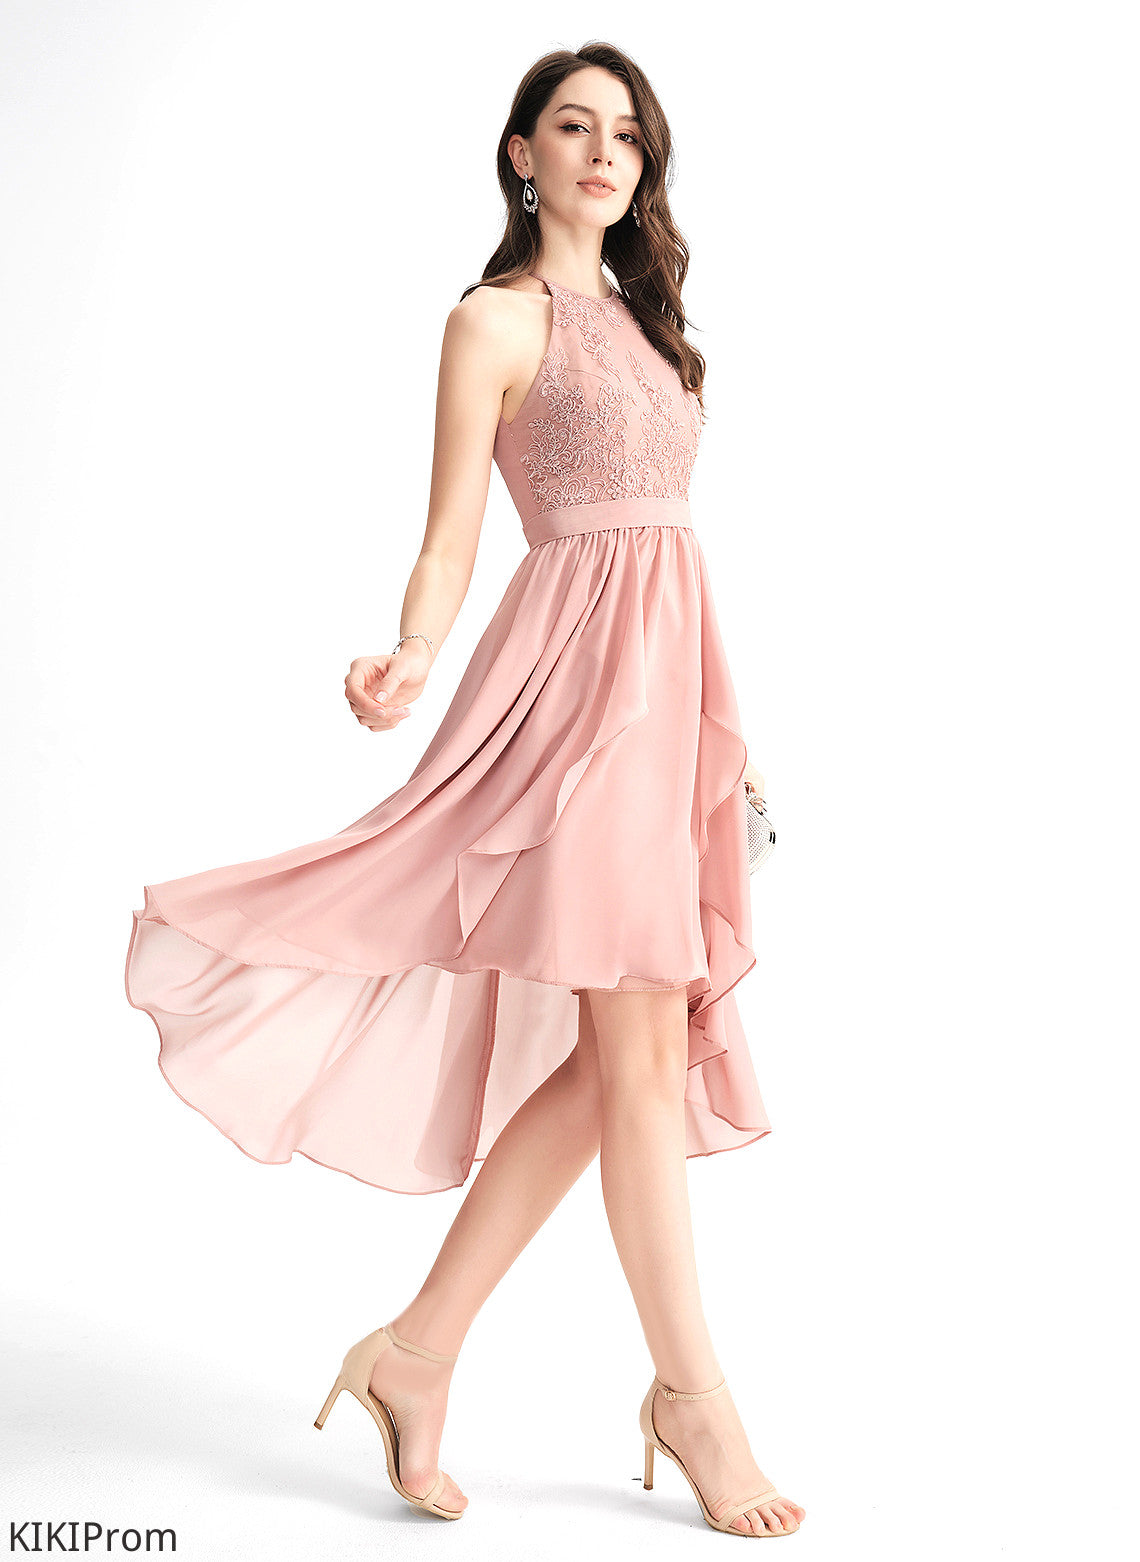 Homecoming Dresses Asymmetrical Monique Neck With Chiffon Scoop Dress A-Line Lace Homecoming